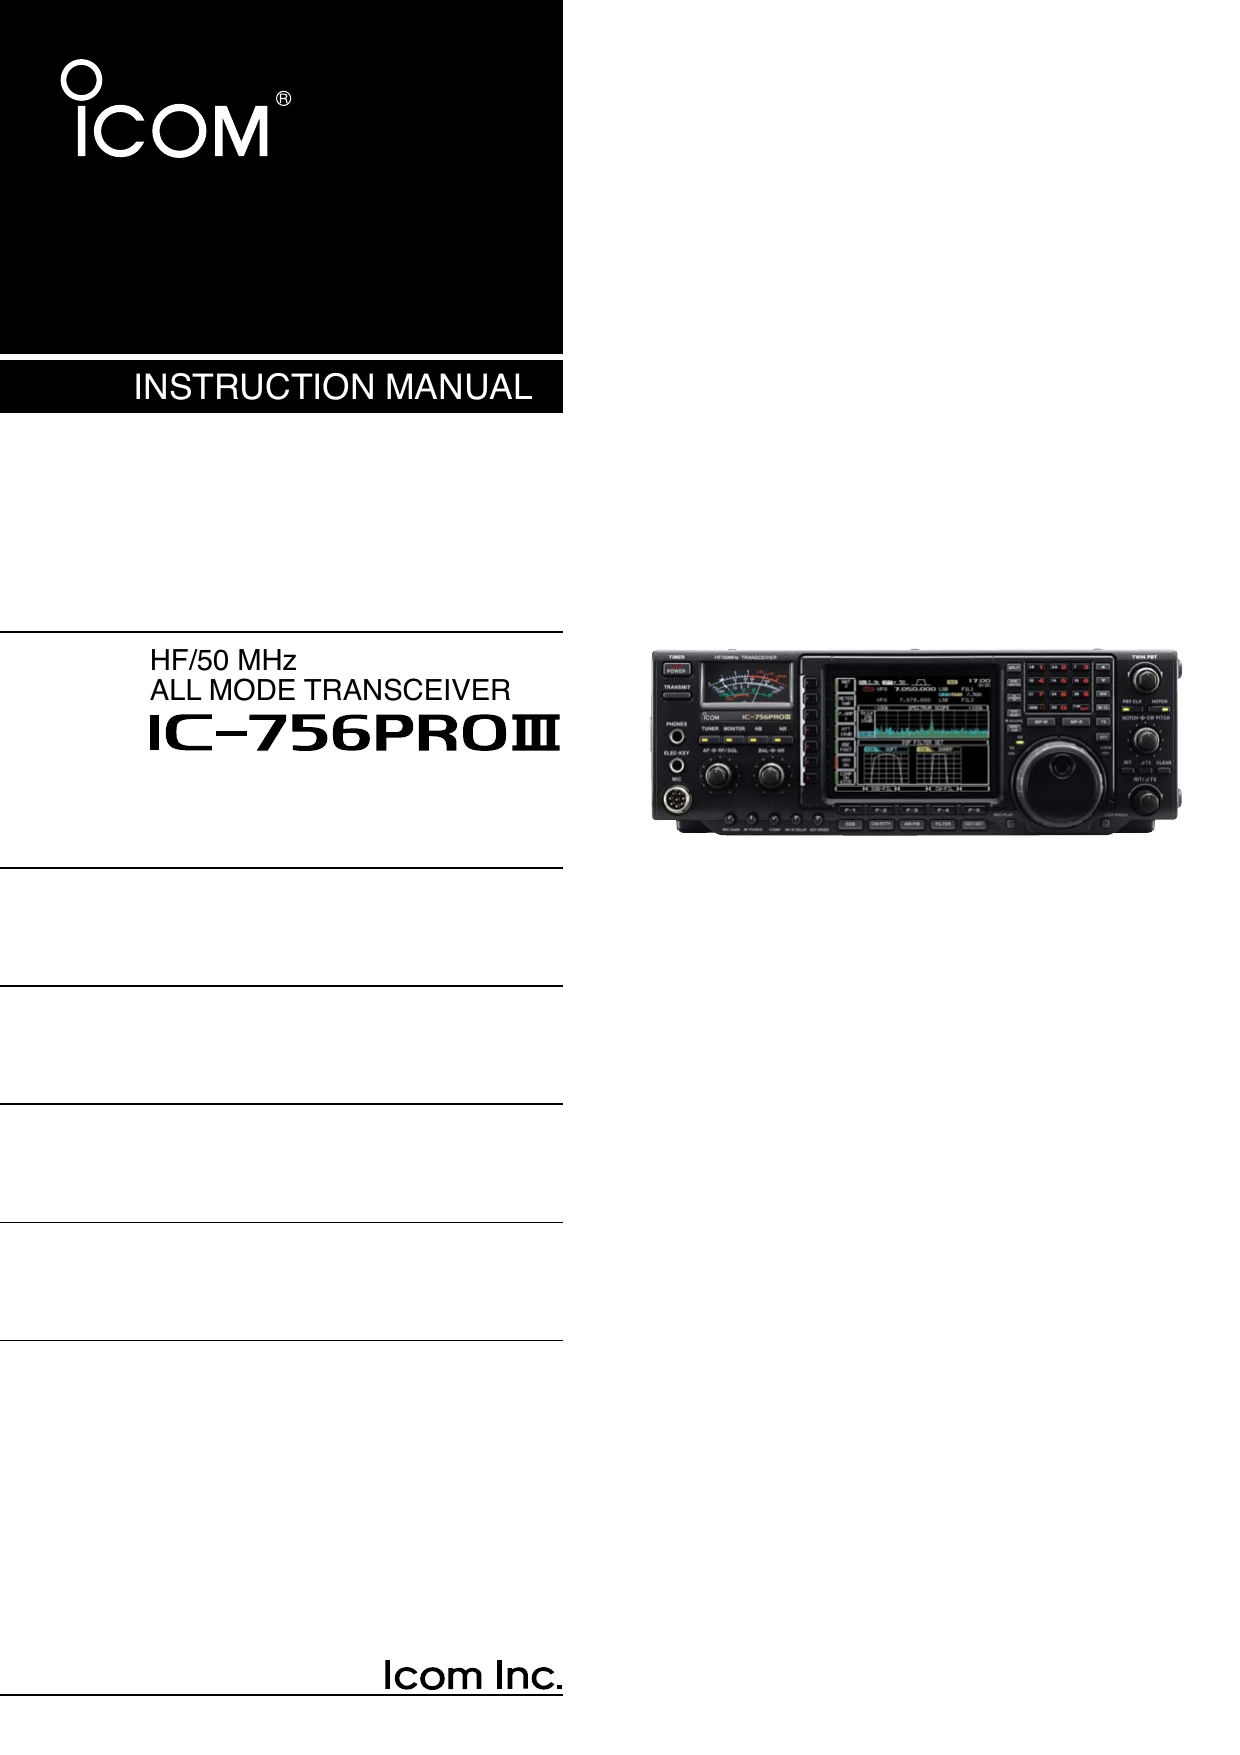 INSTRUCTION MANUALHF/50 MHz ALL MODE TRANSCEIVERThis device complies with Part 15 of the FCC rules. Operation is sub-ject to the following two conditions: (1) This device may not causeharmful interference, and (2) this device must accept any interferencereceived, including interference that may cause undesired operation.